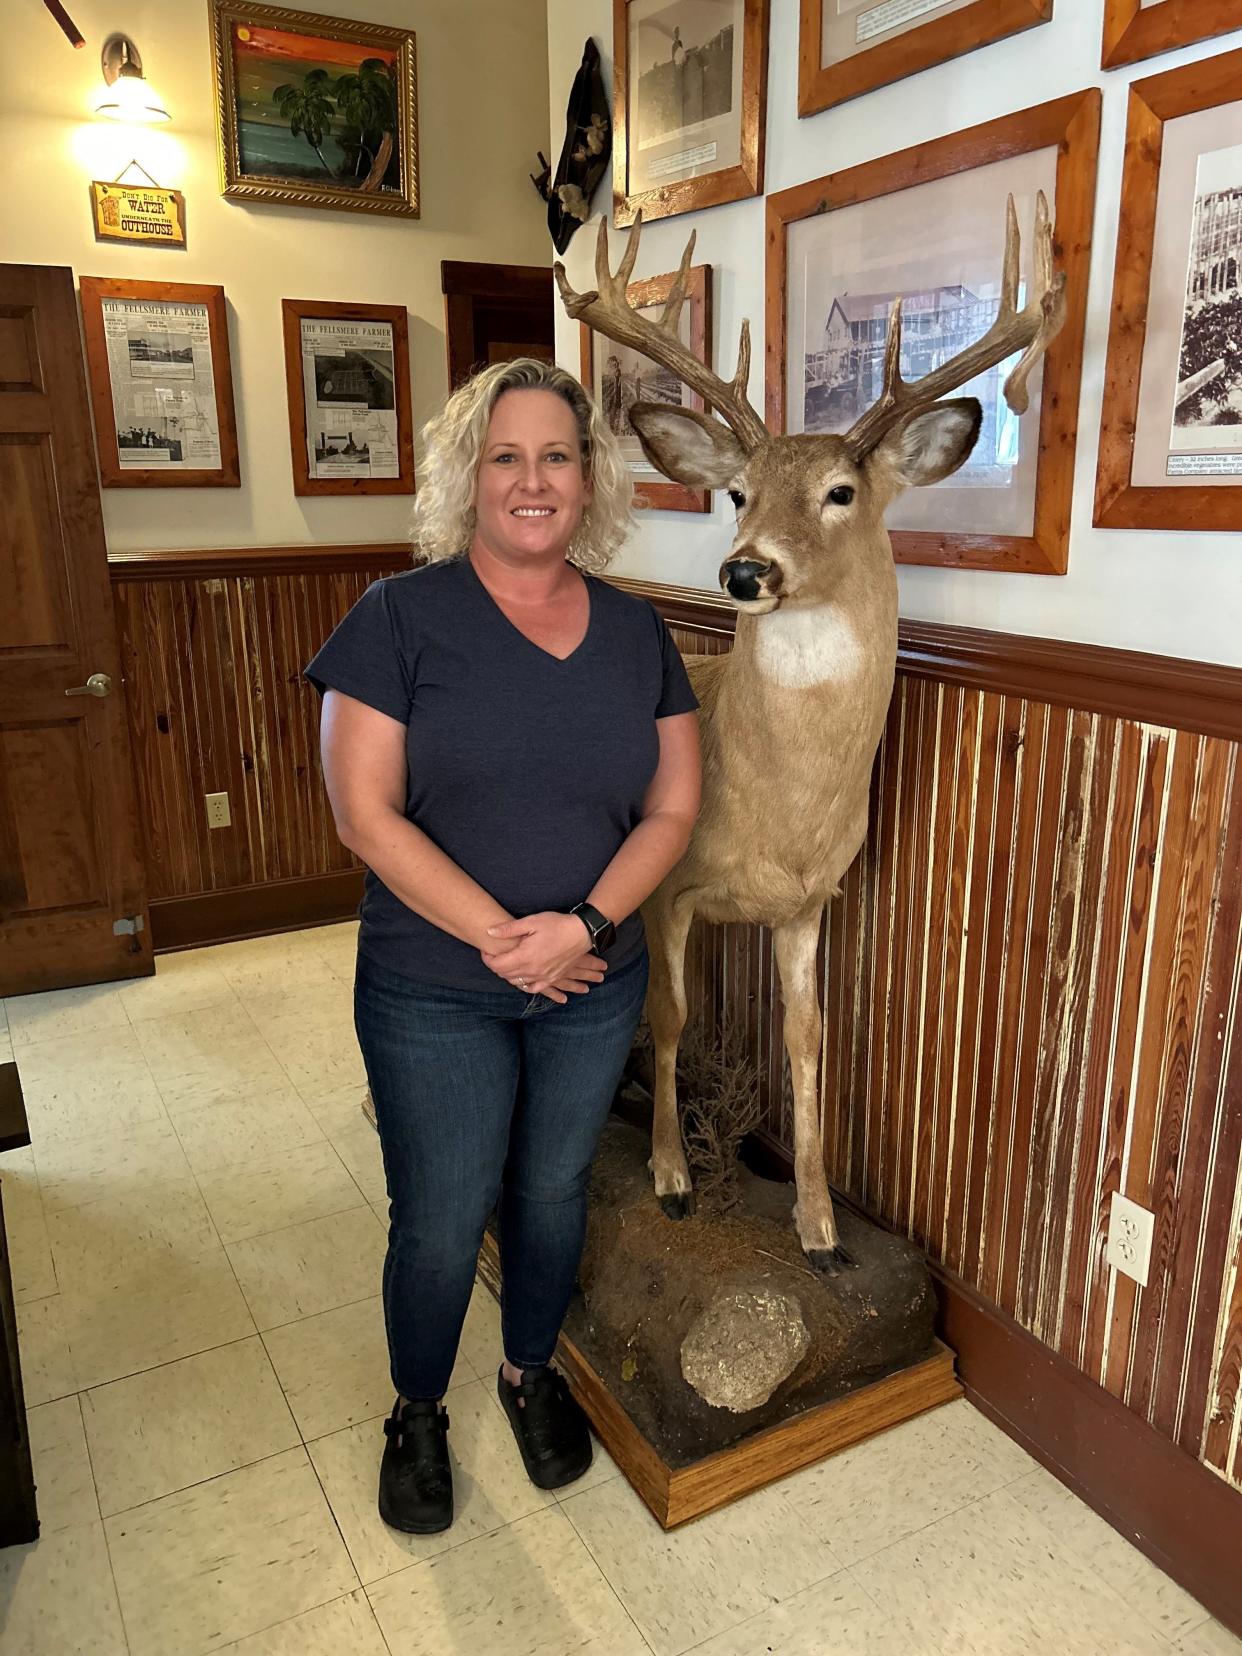 Susan Adams, who owns Marsh Landing in Fellsmere with her mother, Fran Adams, loves that people see the restaurant as a gathering place and museum of town history.